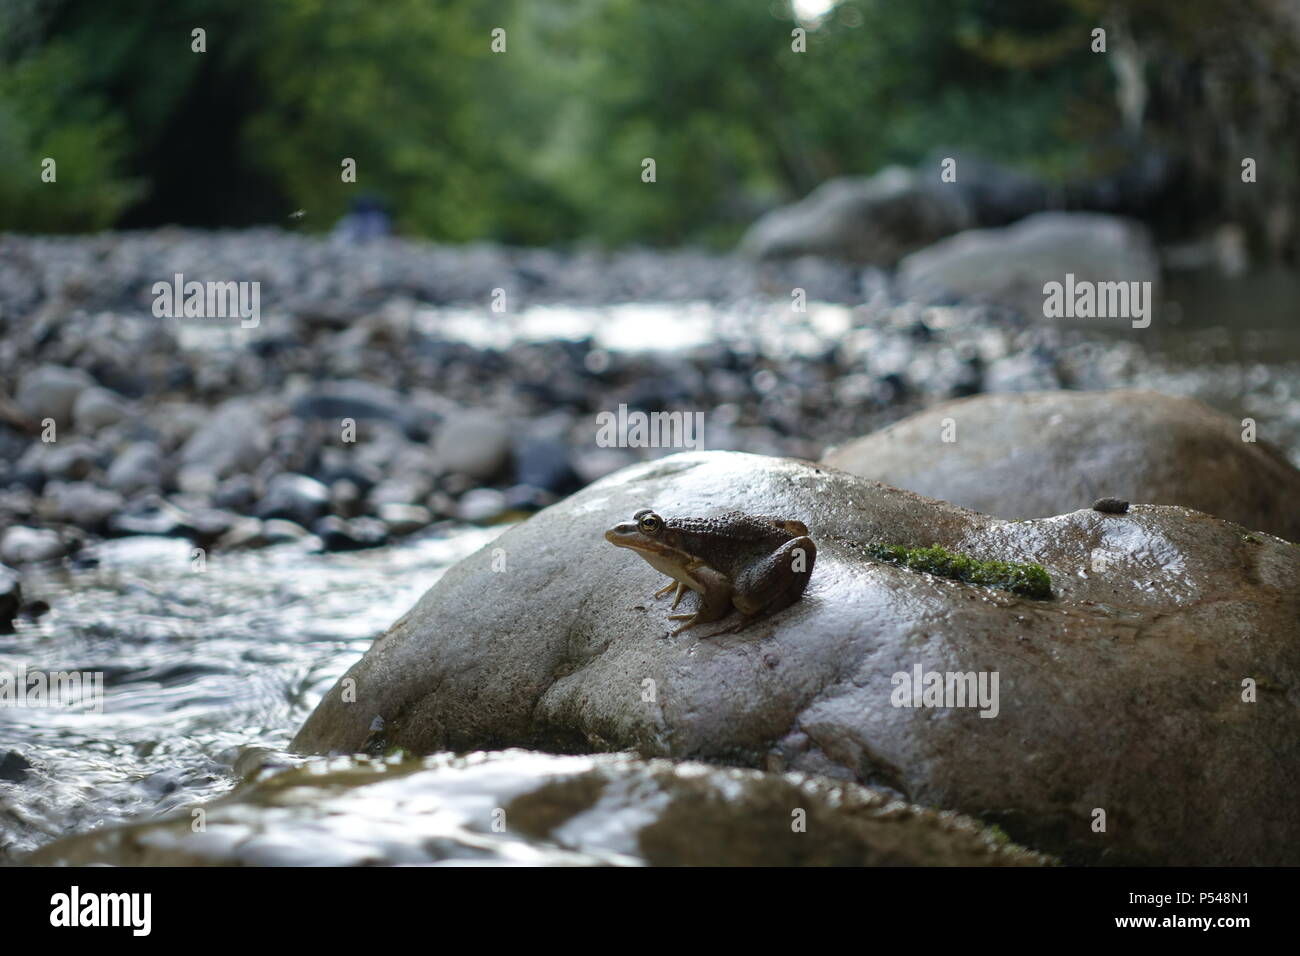 Little Water Frog Sitting by the River on the Stone Stock Photo